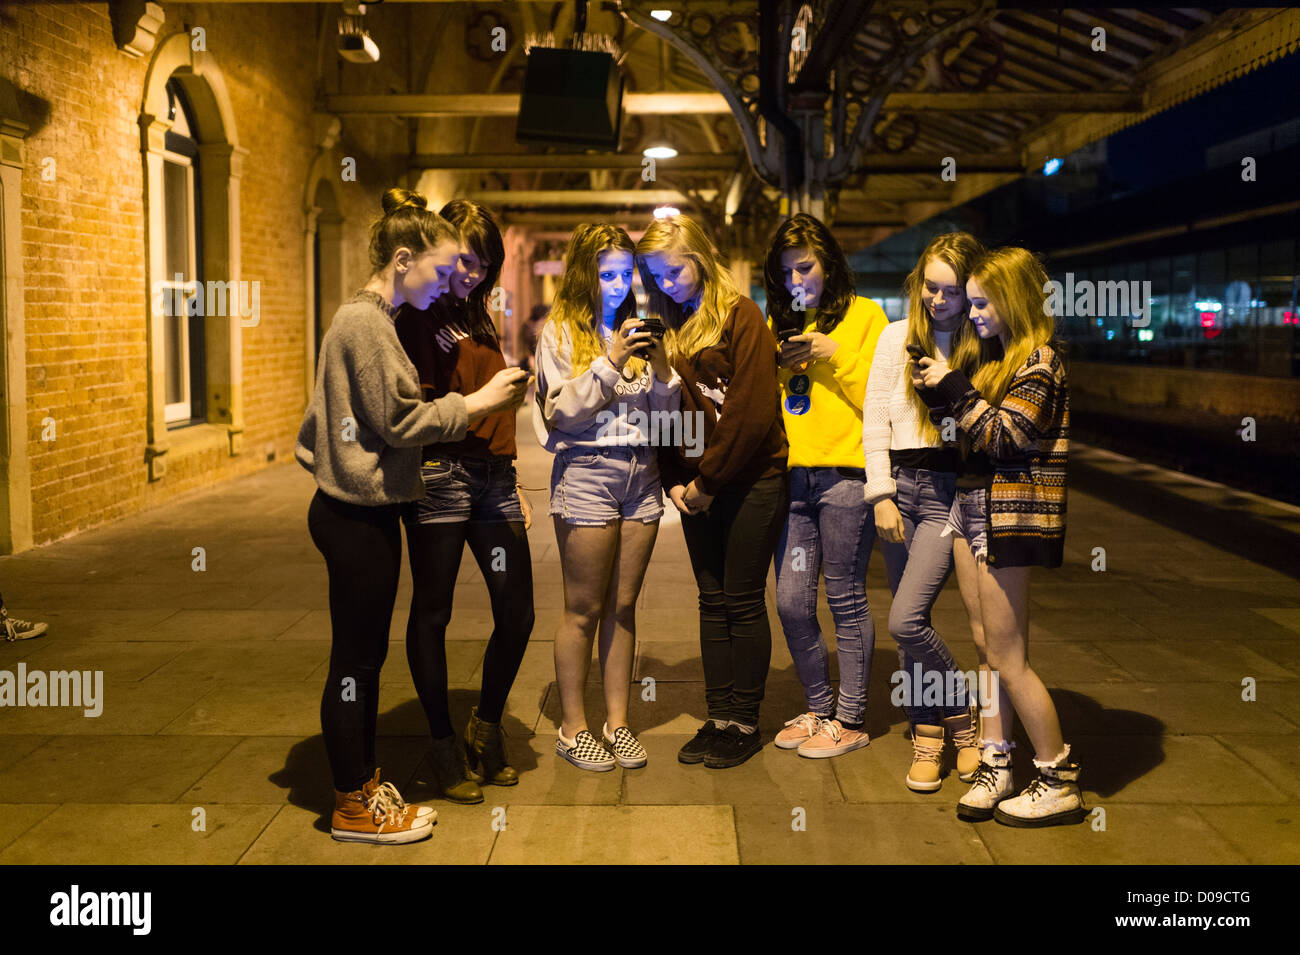 A group of seven 14 15 year old teenage girls friends together outside texting messages on their mobile phones at night UK Stock Photo